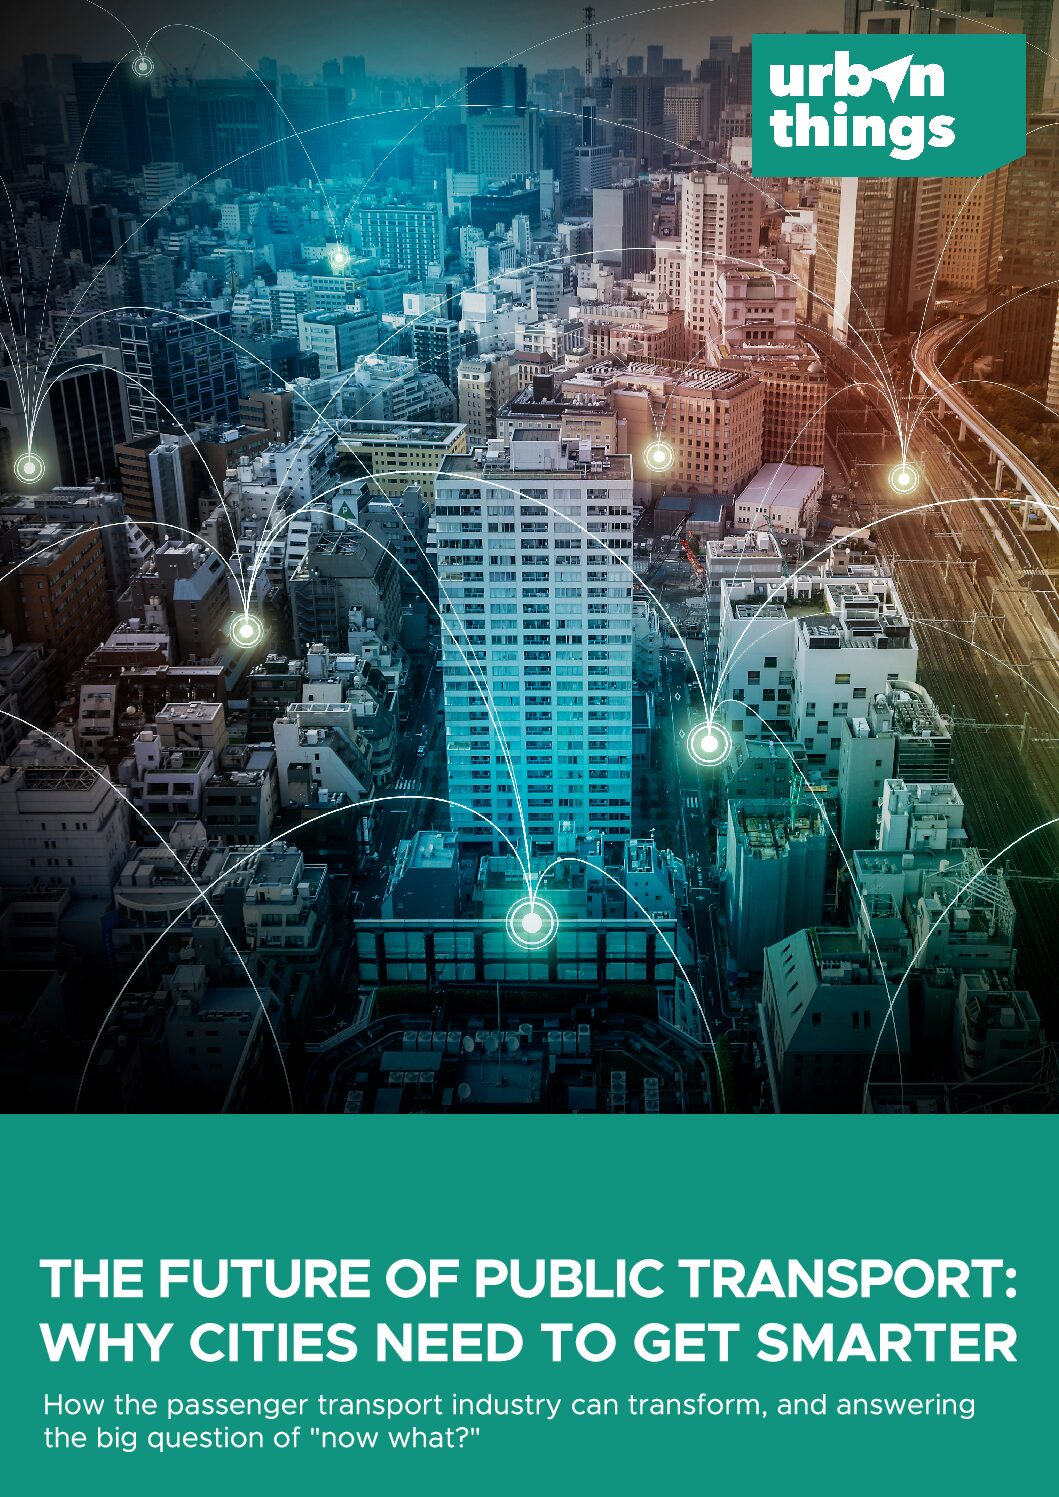 The Future of Public Transport: Why Cities Need to Get Smarter